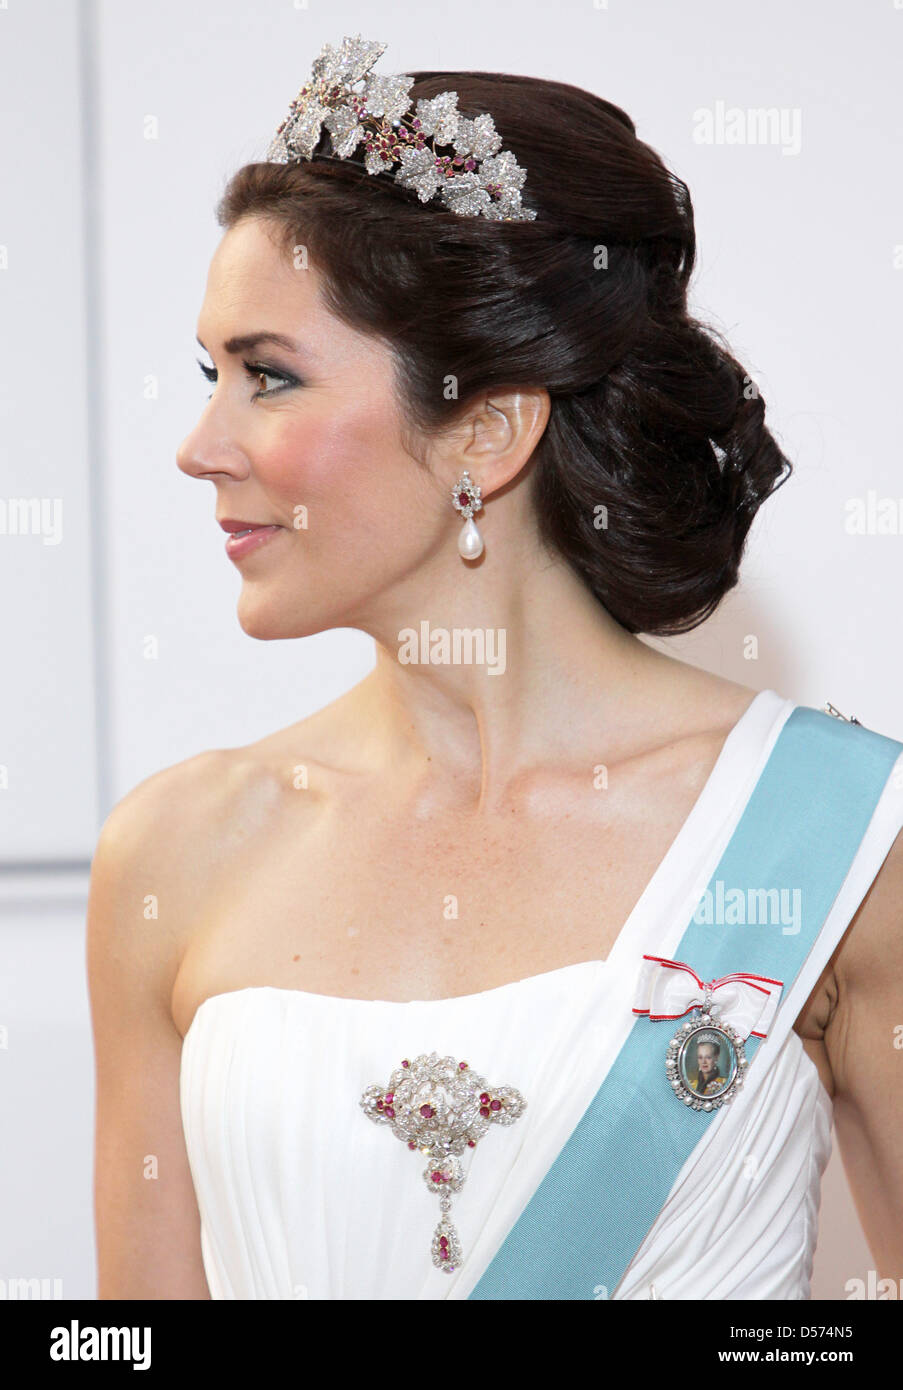 danish-crown-princess-mary-attends-a-special-gala-show-at-the-royal-D574N5.jpg